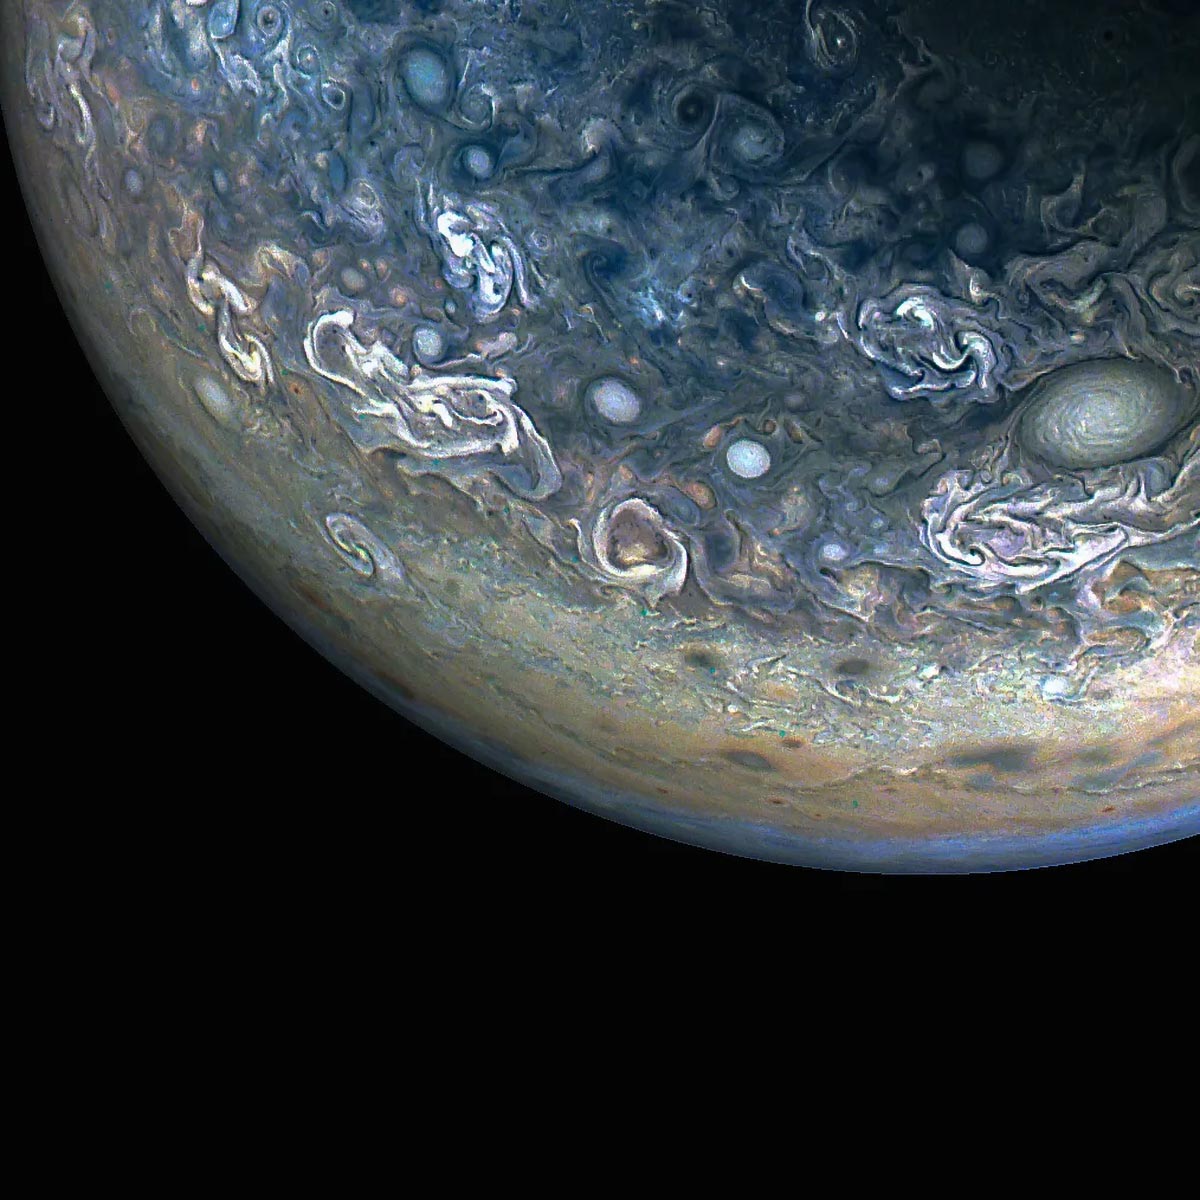 NASA’s Juno Spacecraft Captures Stunning Images of Jupiter’s Colorful Chaos